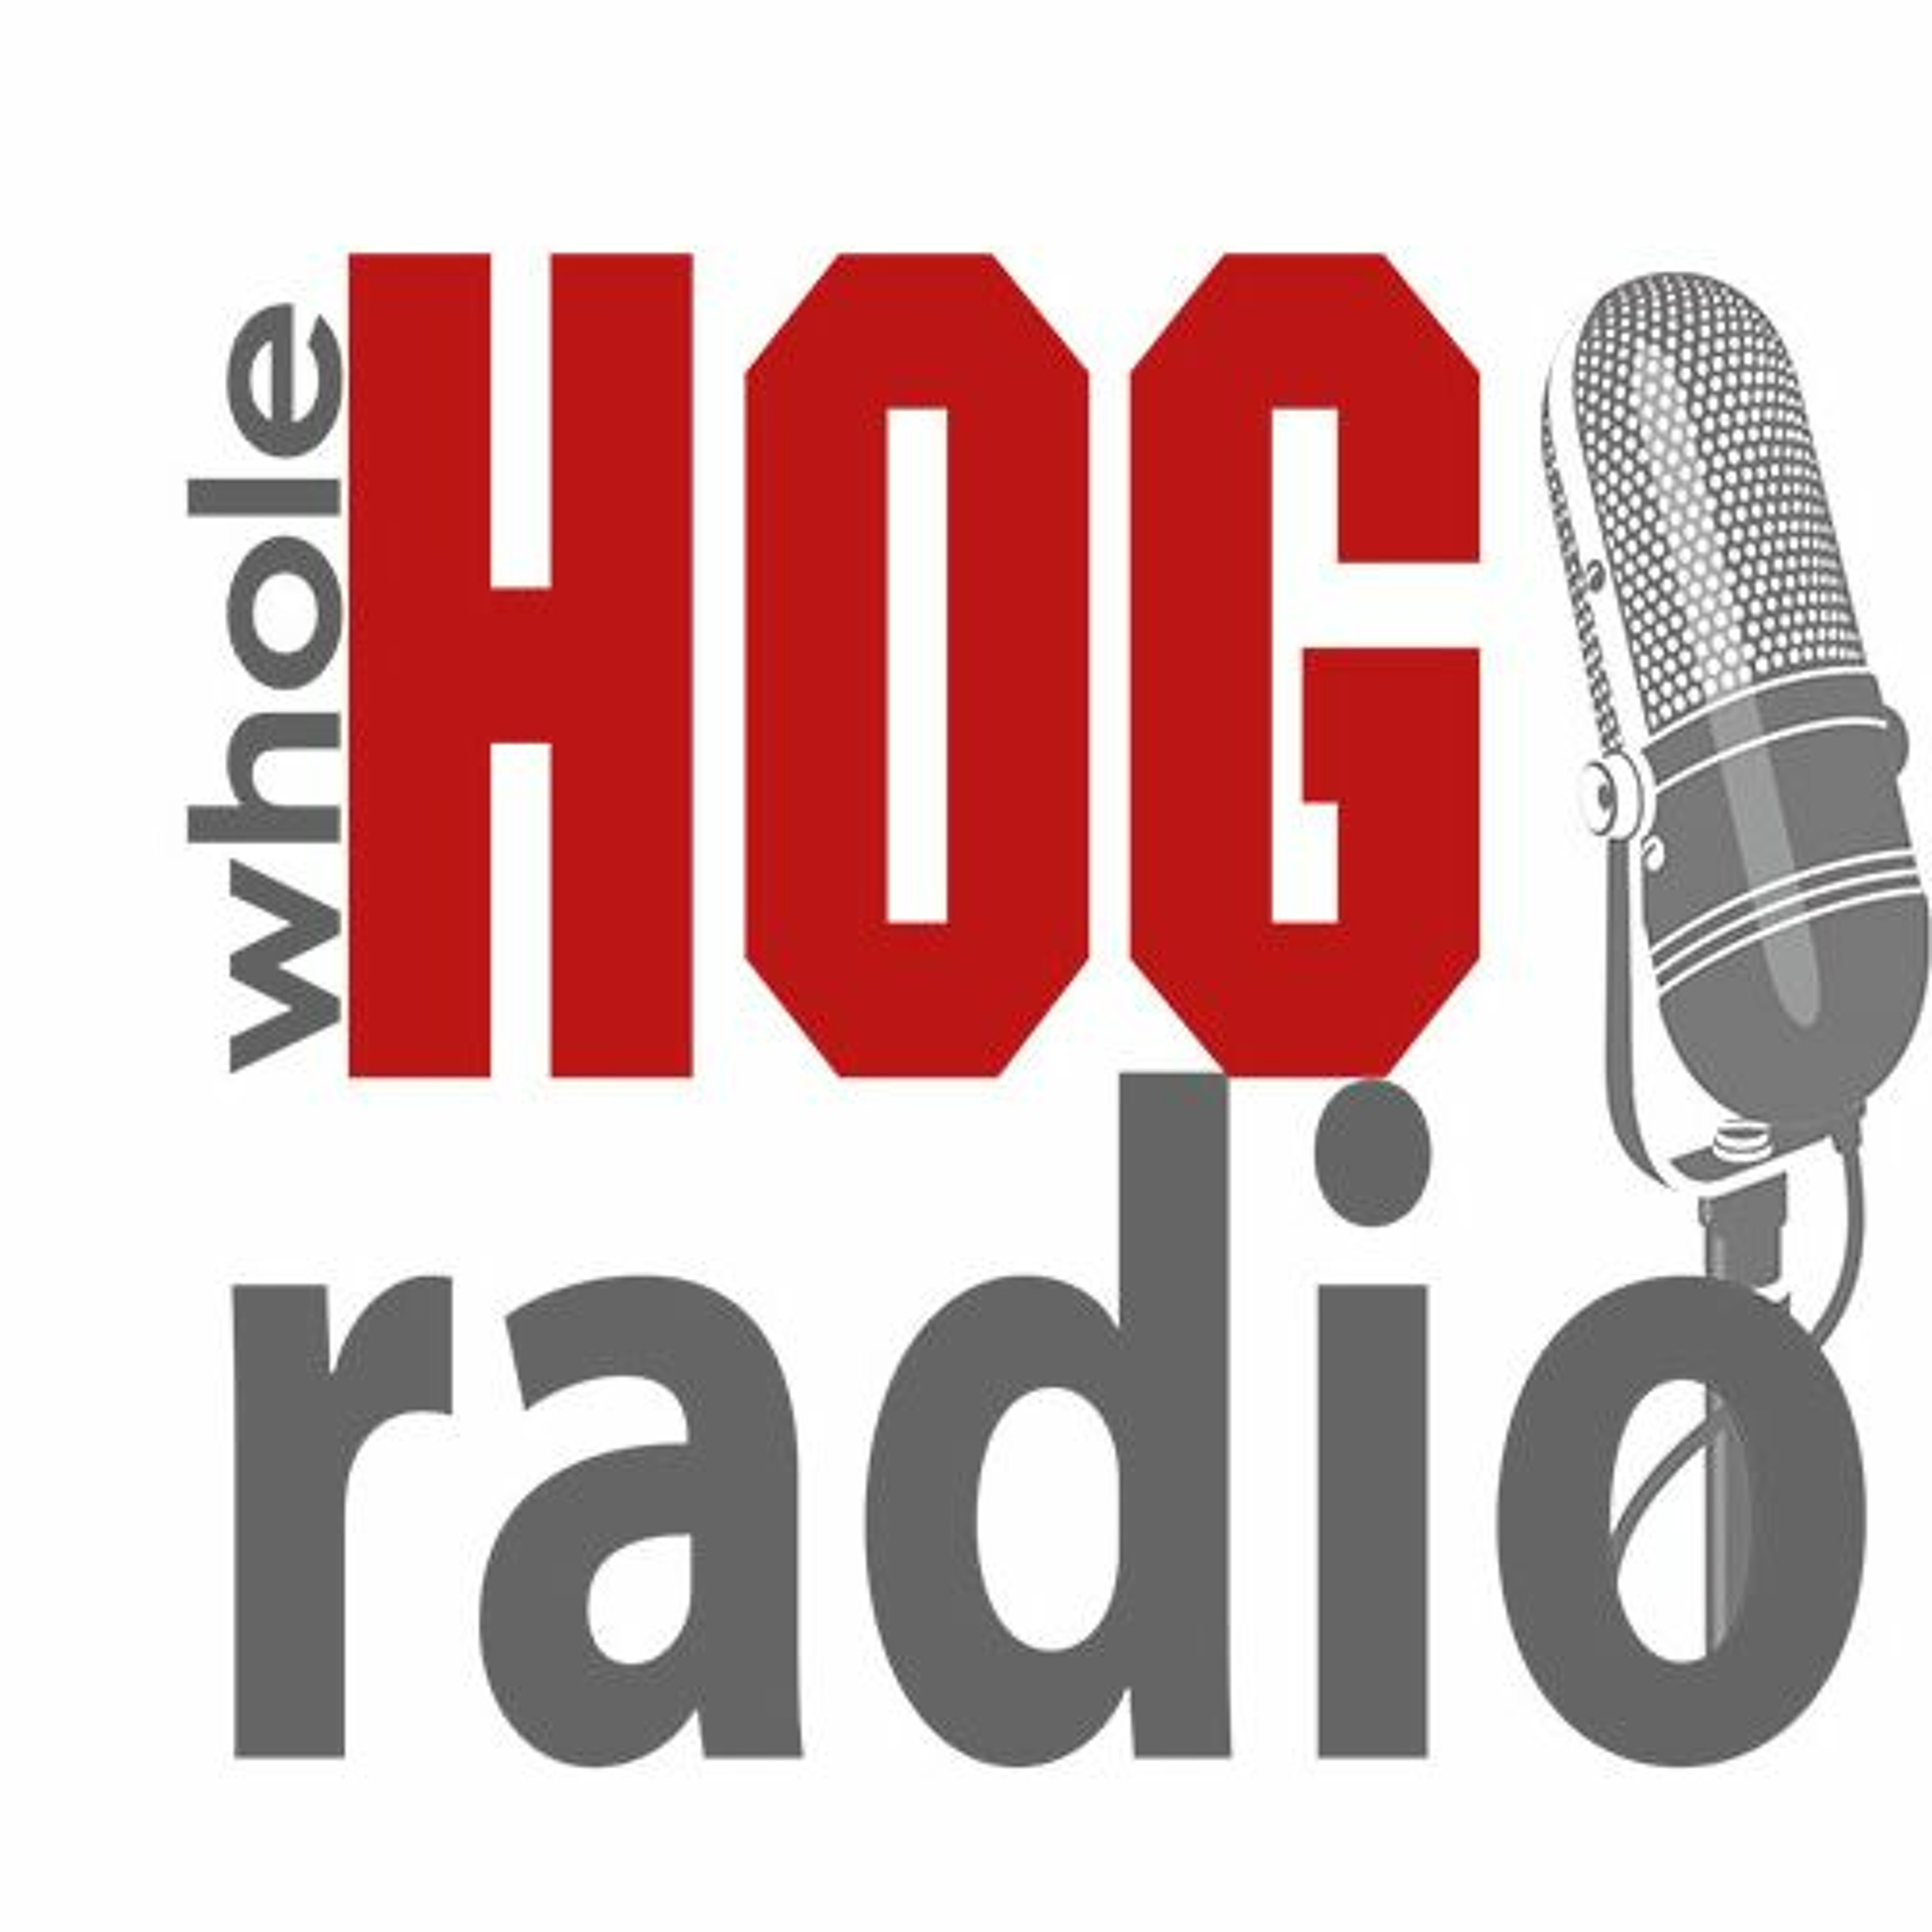 WholeHog Podcast: Signing day recap and best of the decade with Dudley Dawson